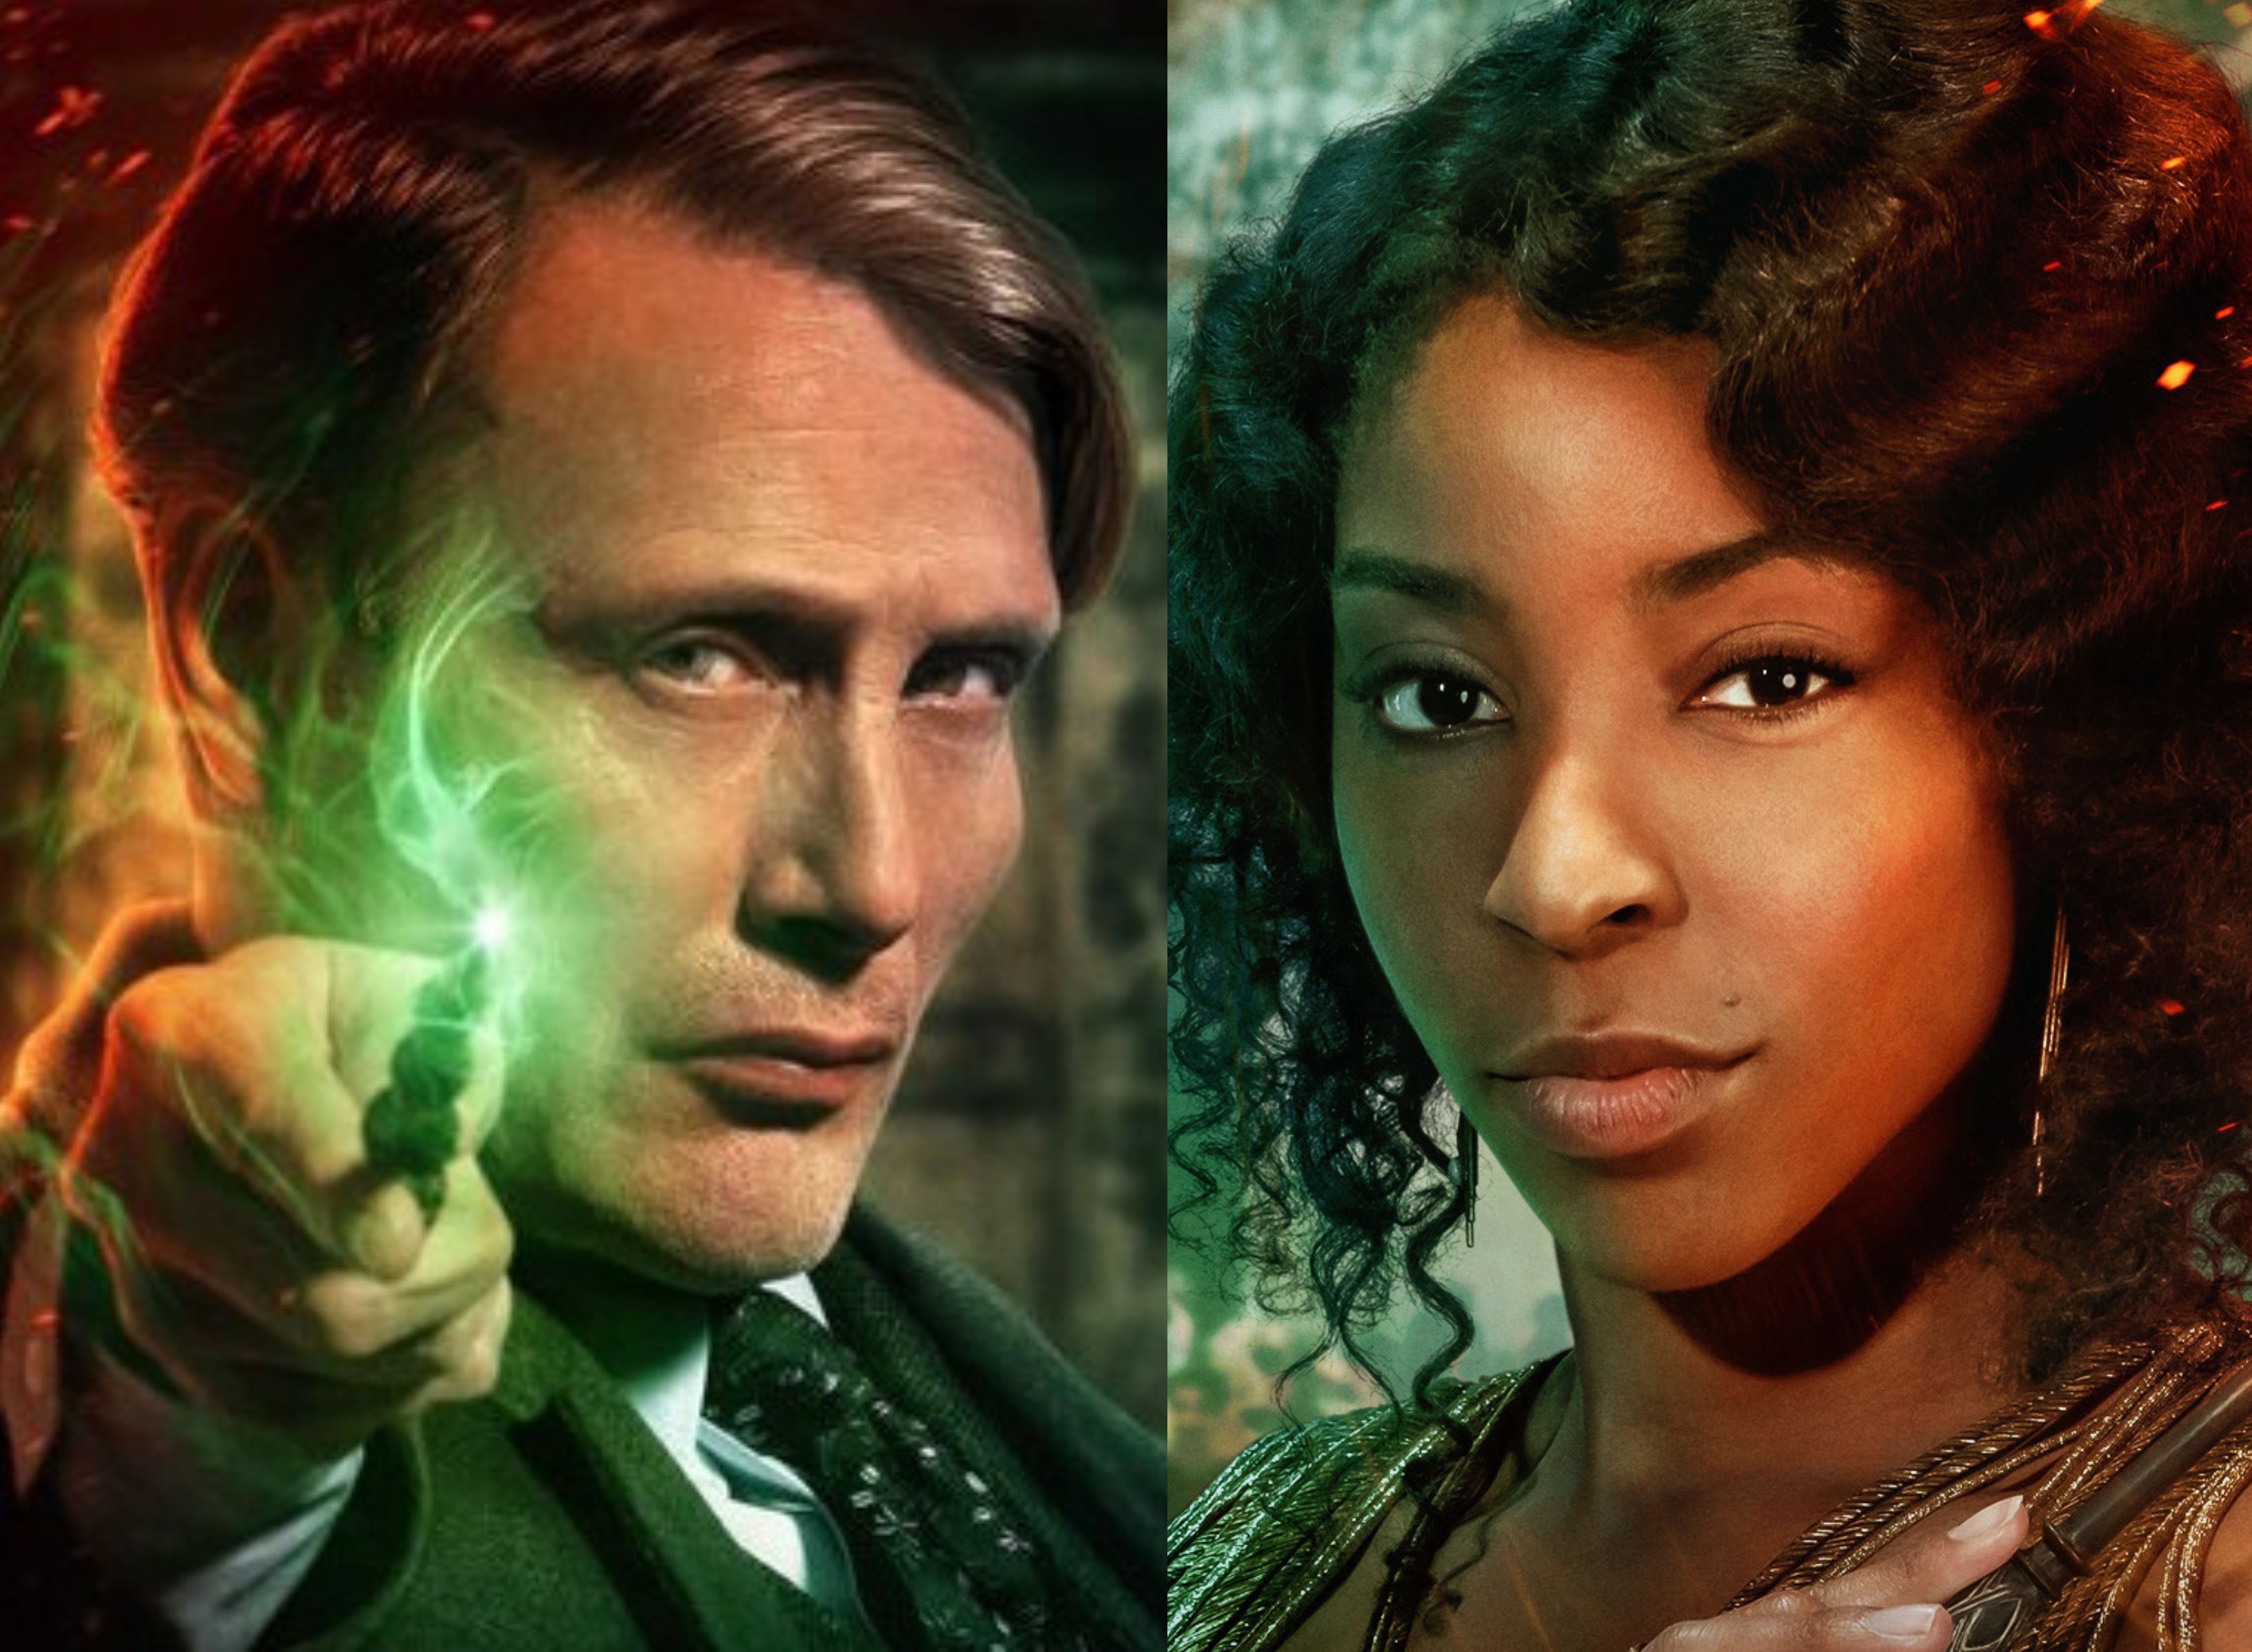 Jessica Williams and Mads Mikkelsen assets